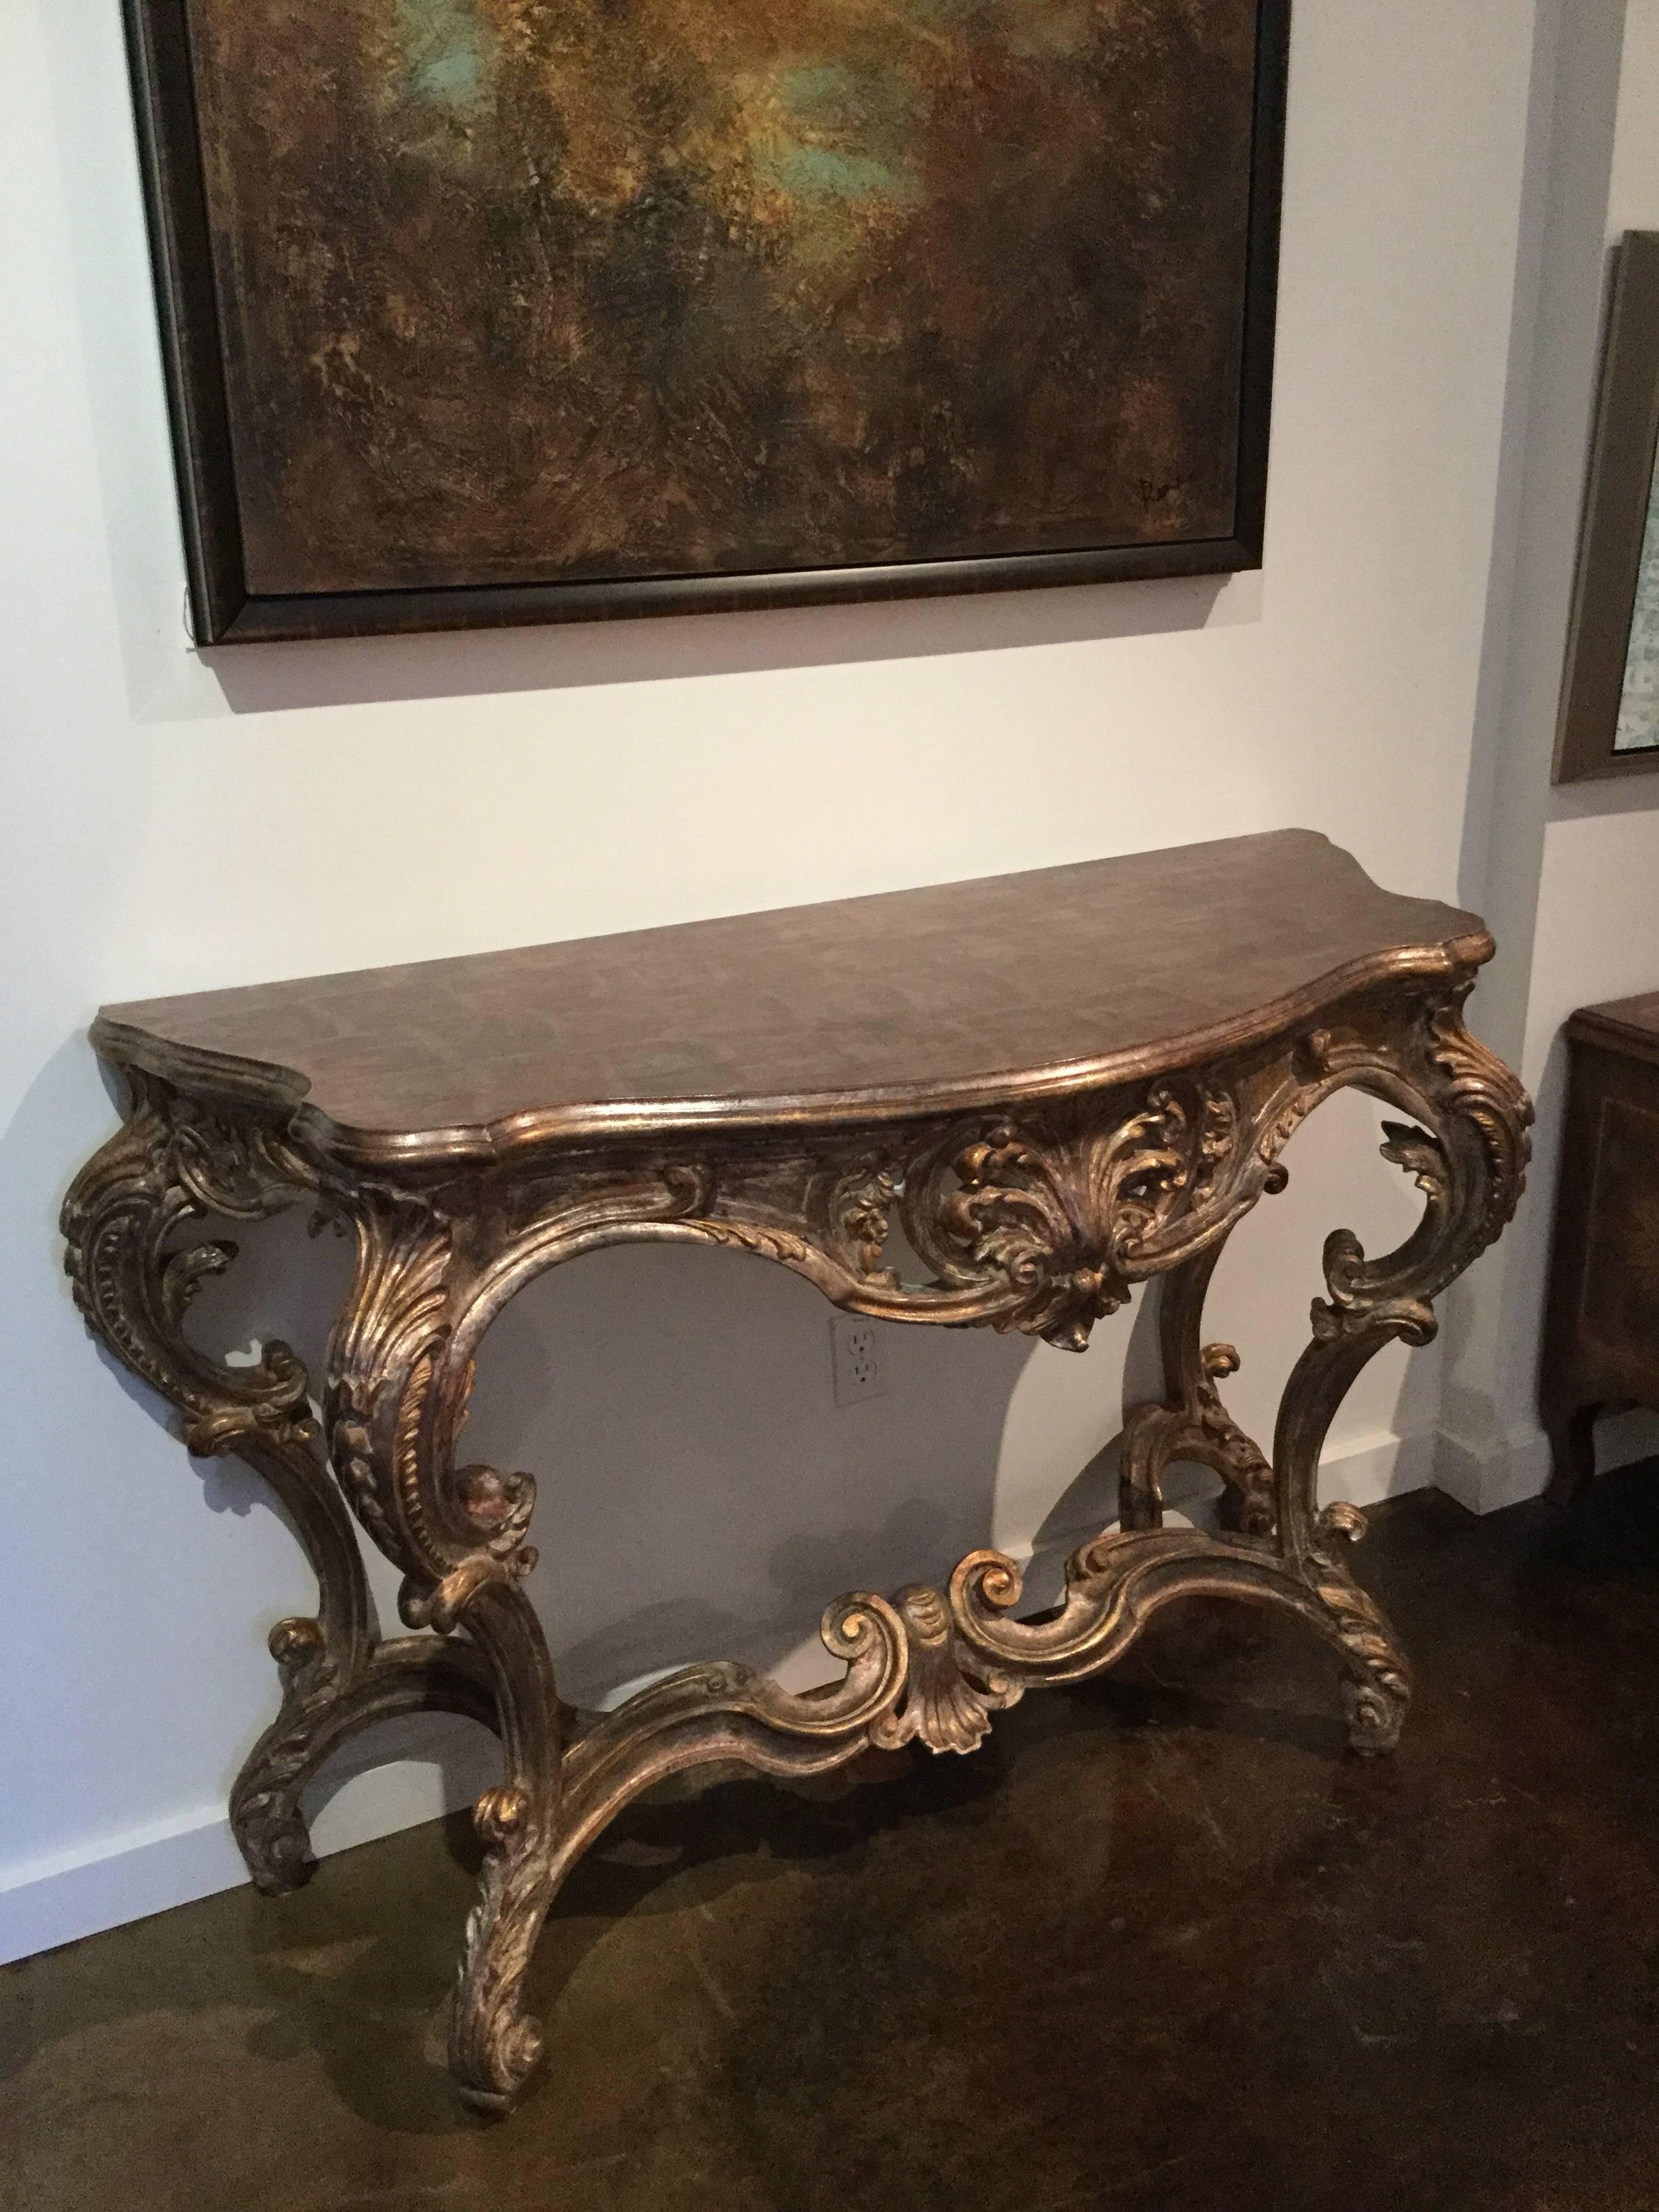 Rococo style wall console heavily hand-carved with shells, rosettes and acanthus leaves, resting on four feet, finished in as antiqued silver gilt and topped with a faux marbling texture, Italy, circa 1960.